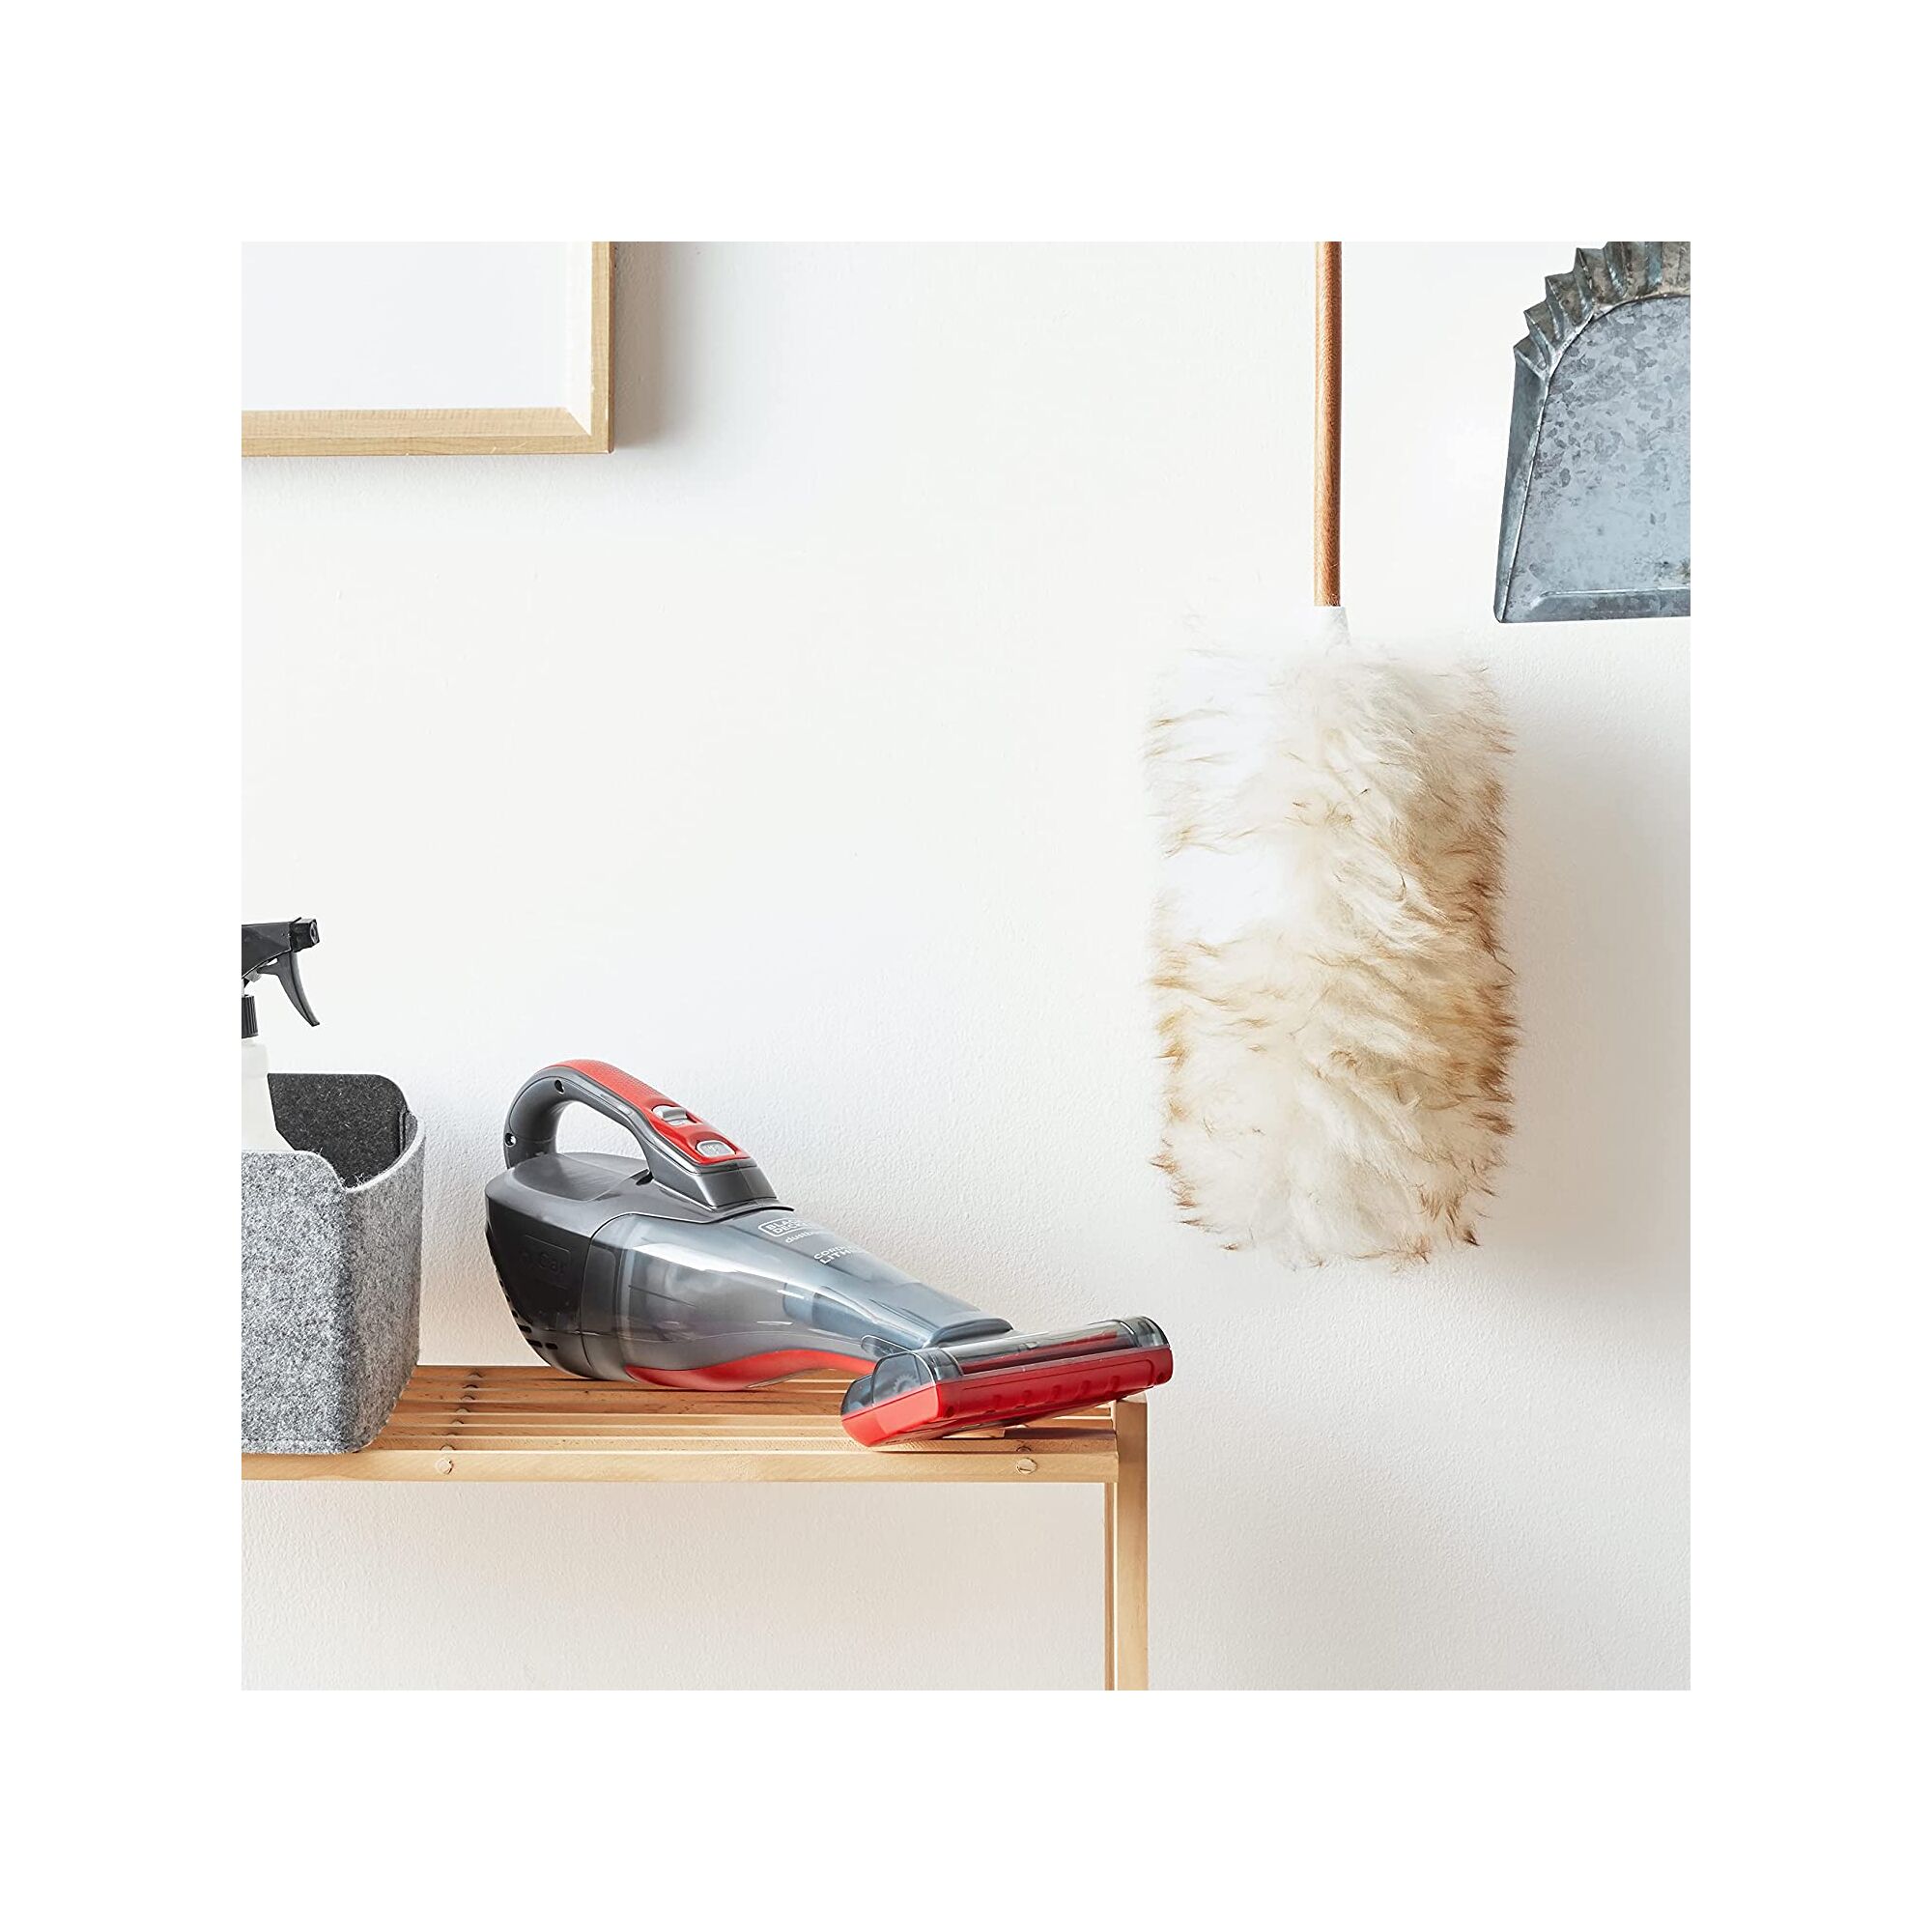 Dustbuster handheld vacuum sitting on a shelf in a utility room